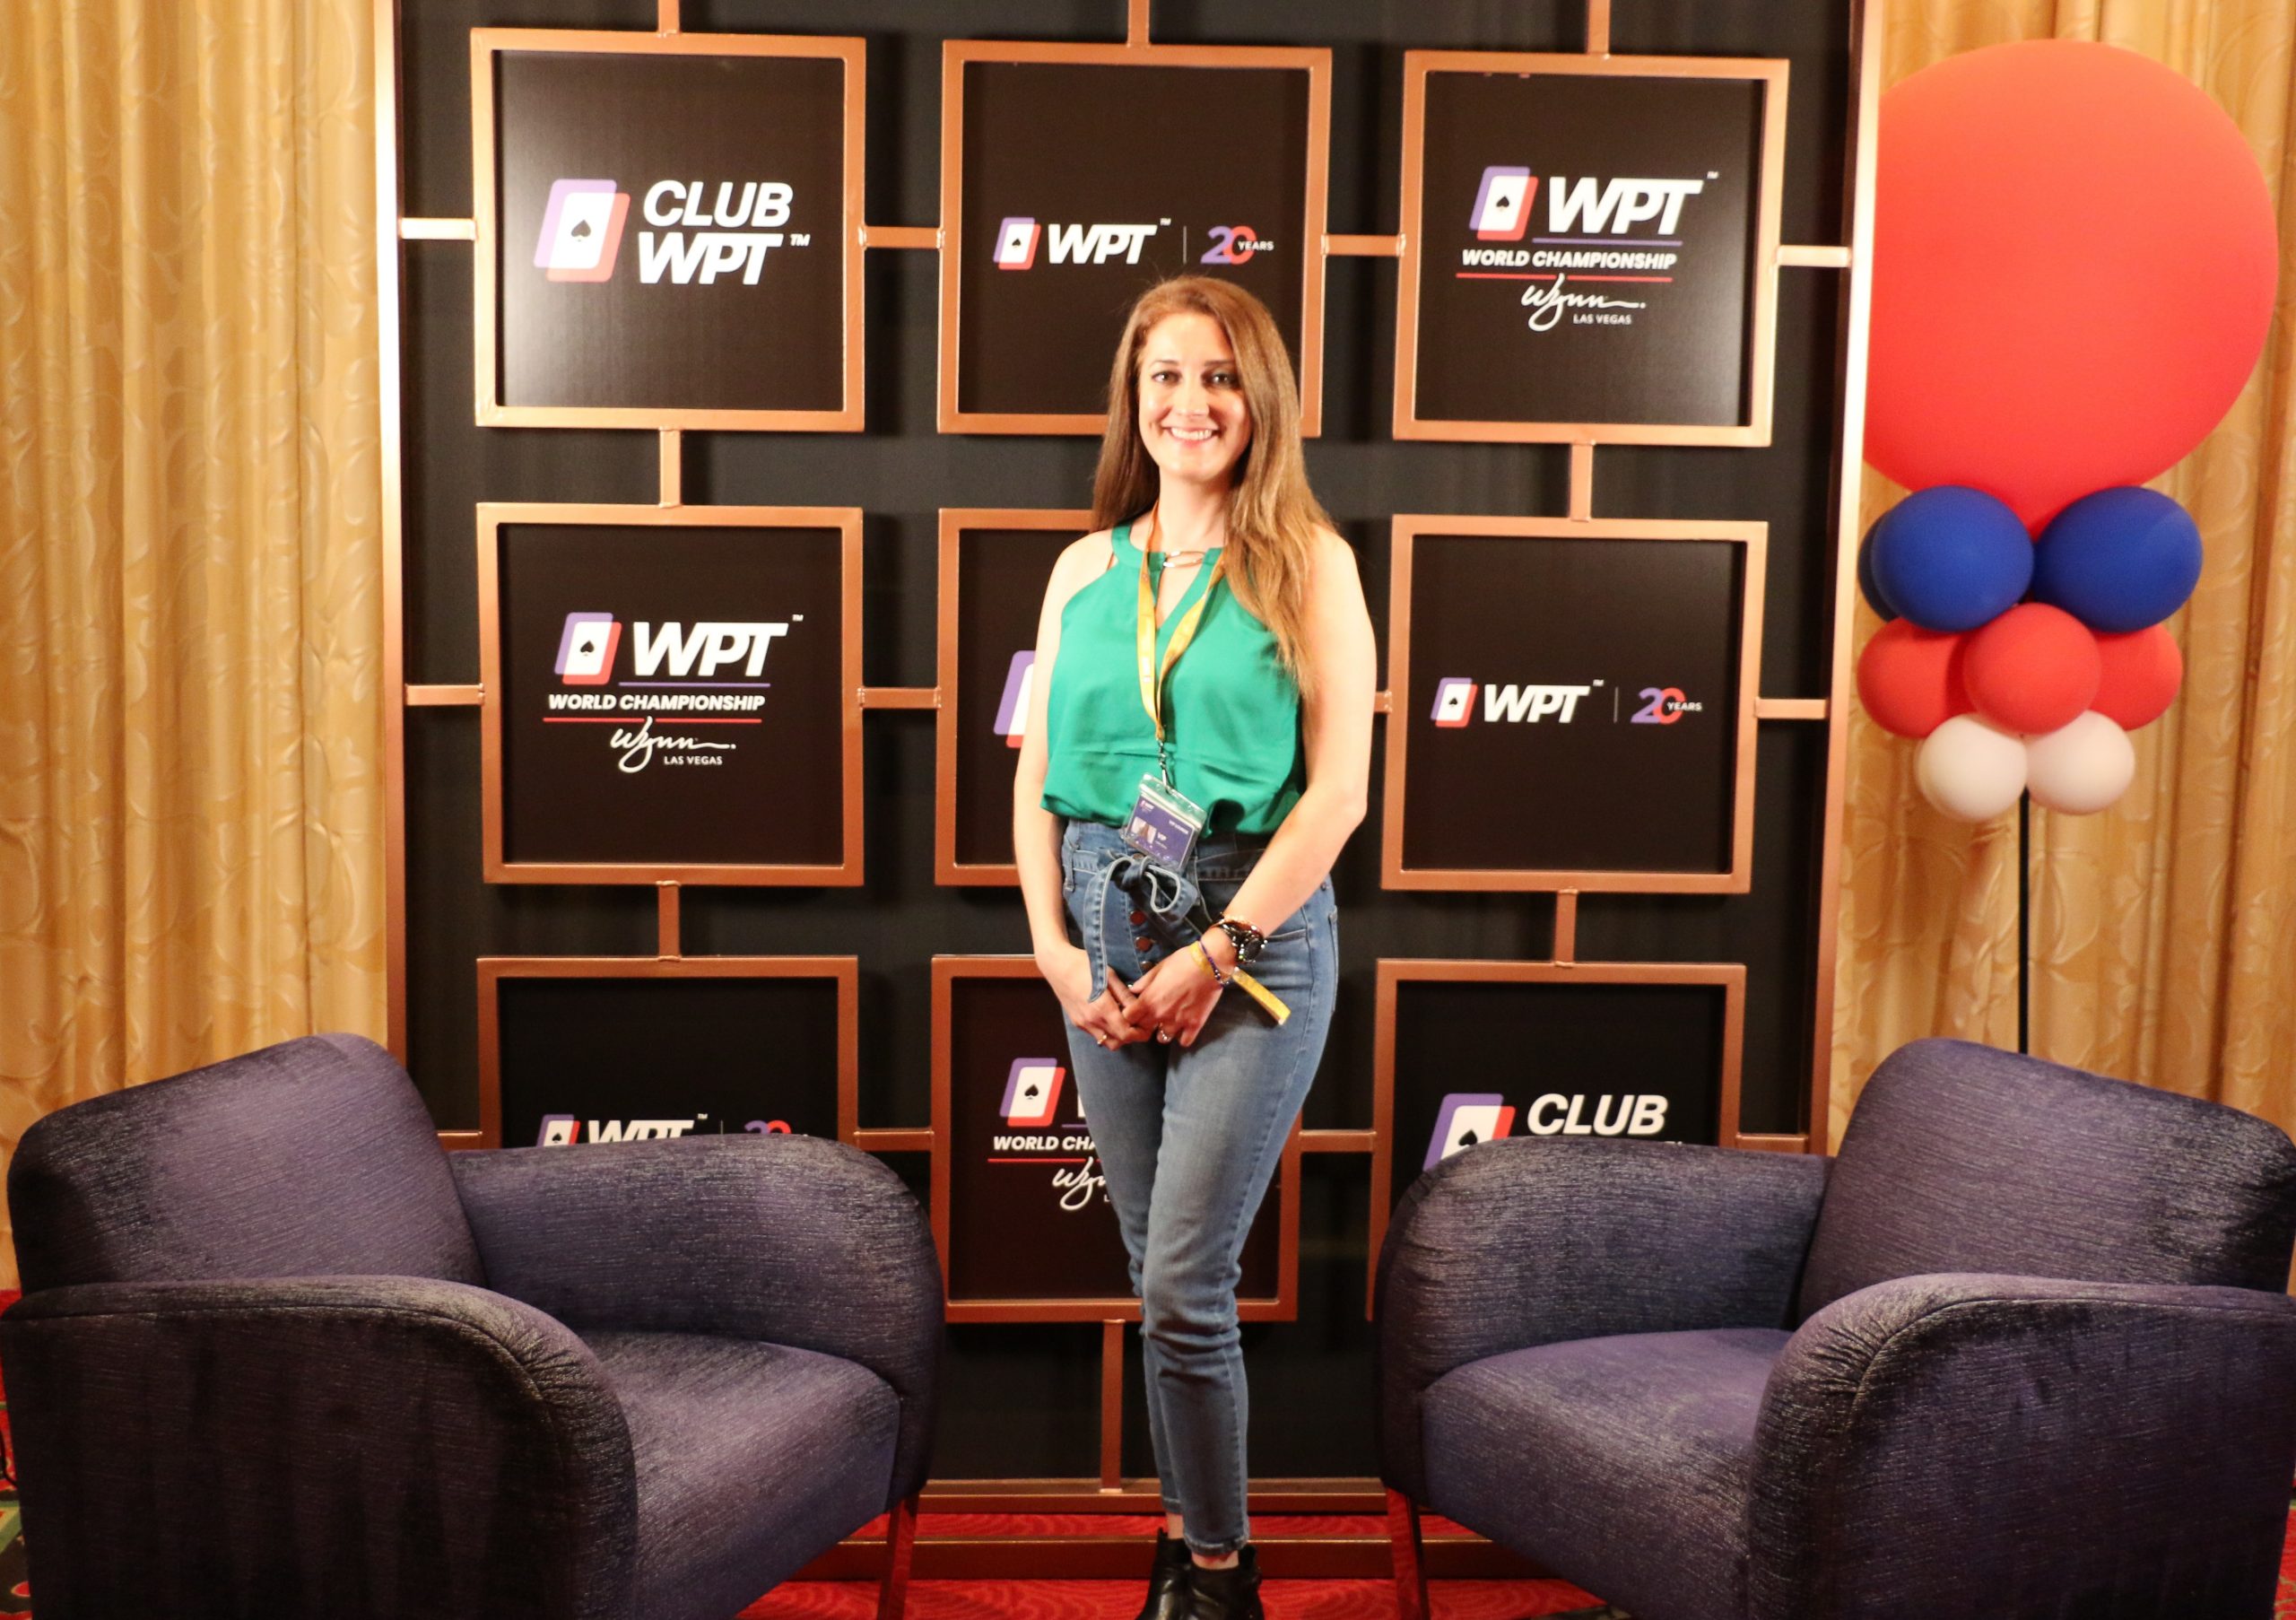 WPT World Championship Stories: Jules – ‘There’s No Other Experience Like It’